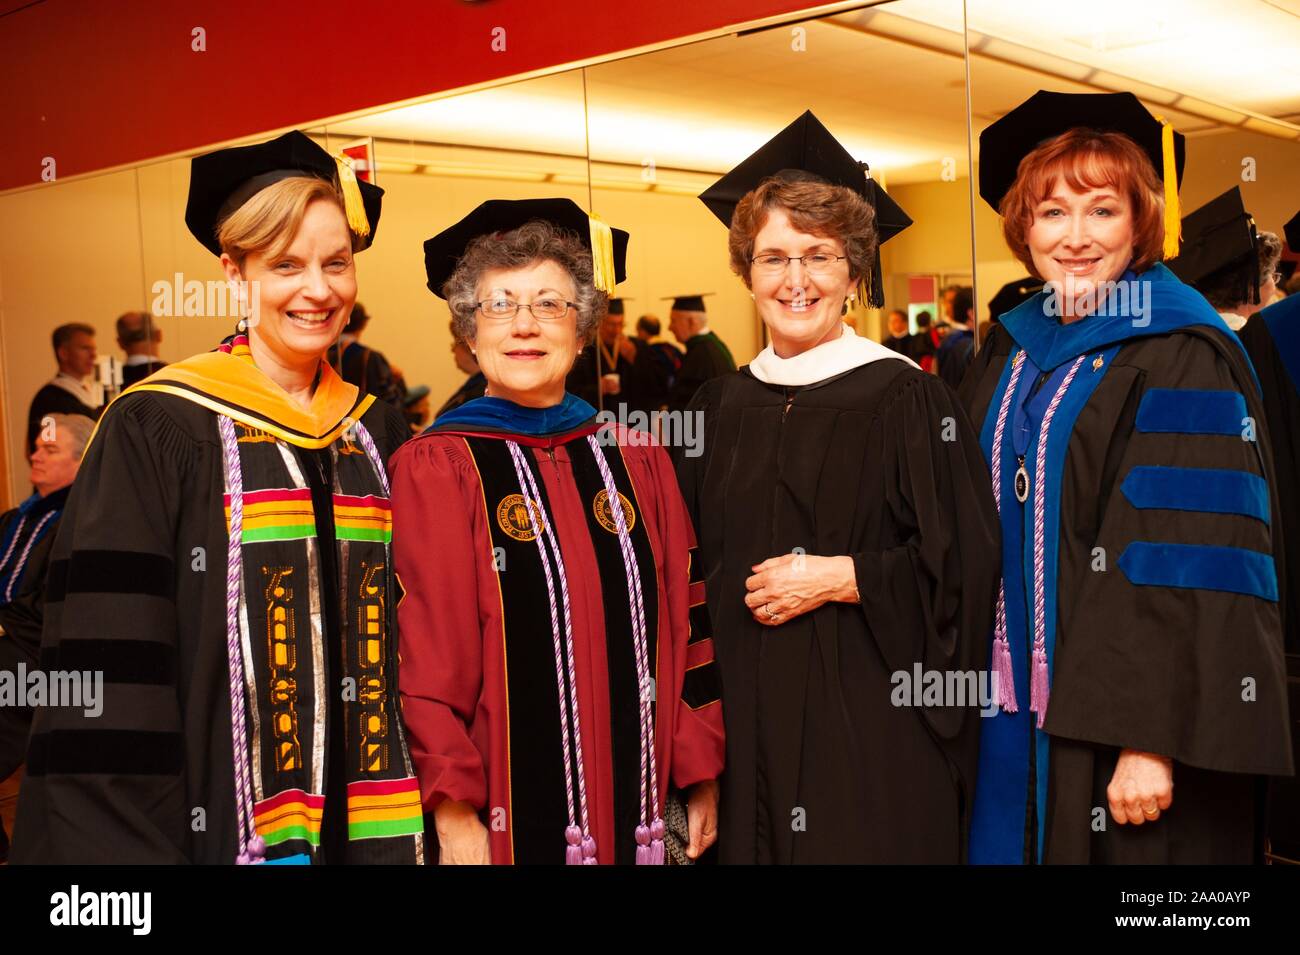 Students and faculty participate in a commencement or graduation ceremony at the Johns Hopkins University in Baltimore, Maryland, May 21, 2009. From the Homewood Photography collection. () Stock Photo